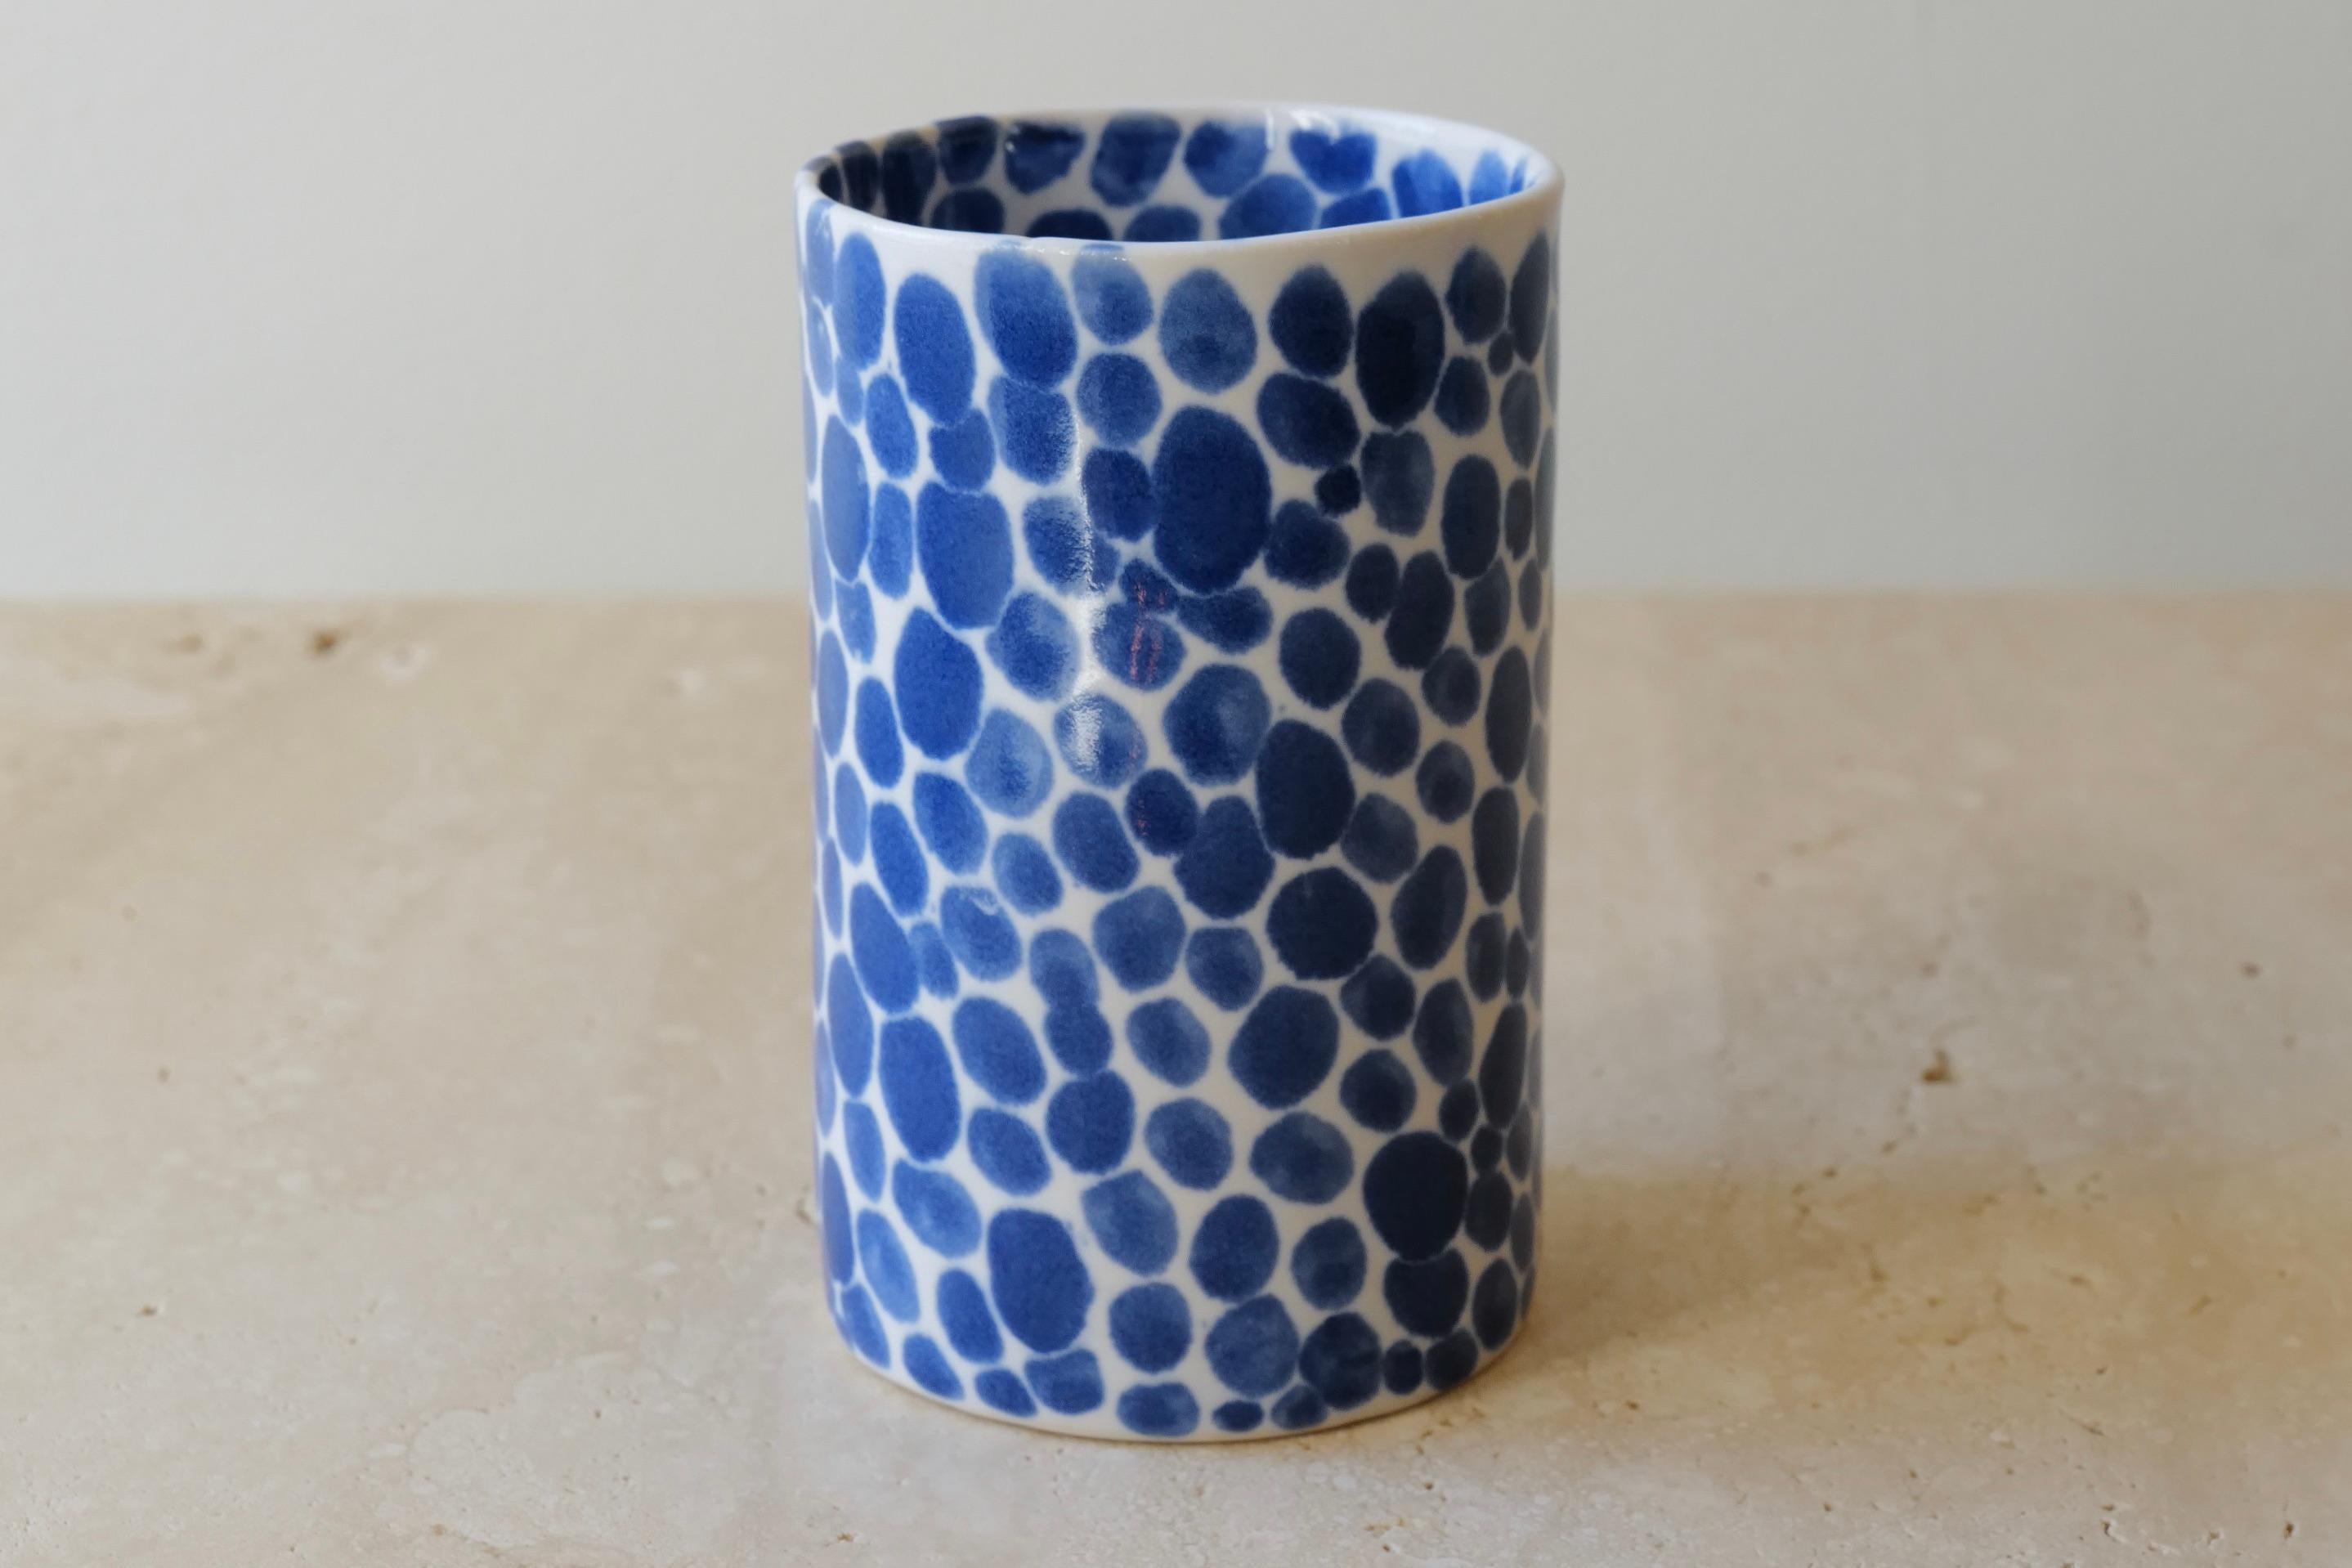 Ceramic drinking cup. Hand-cast in porcelain and once bisque fired, each dot is hand-painted with a traditional cobalt blue glaze. An unconventional layered glazing technique, developed by the artist, is used in these cast porcelain pieces. The